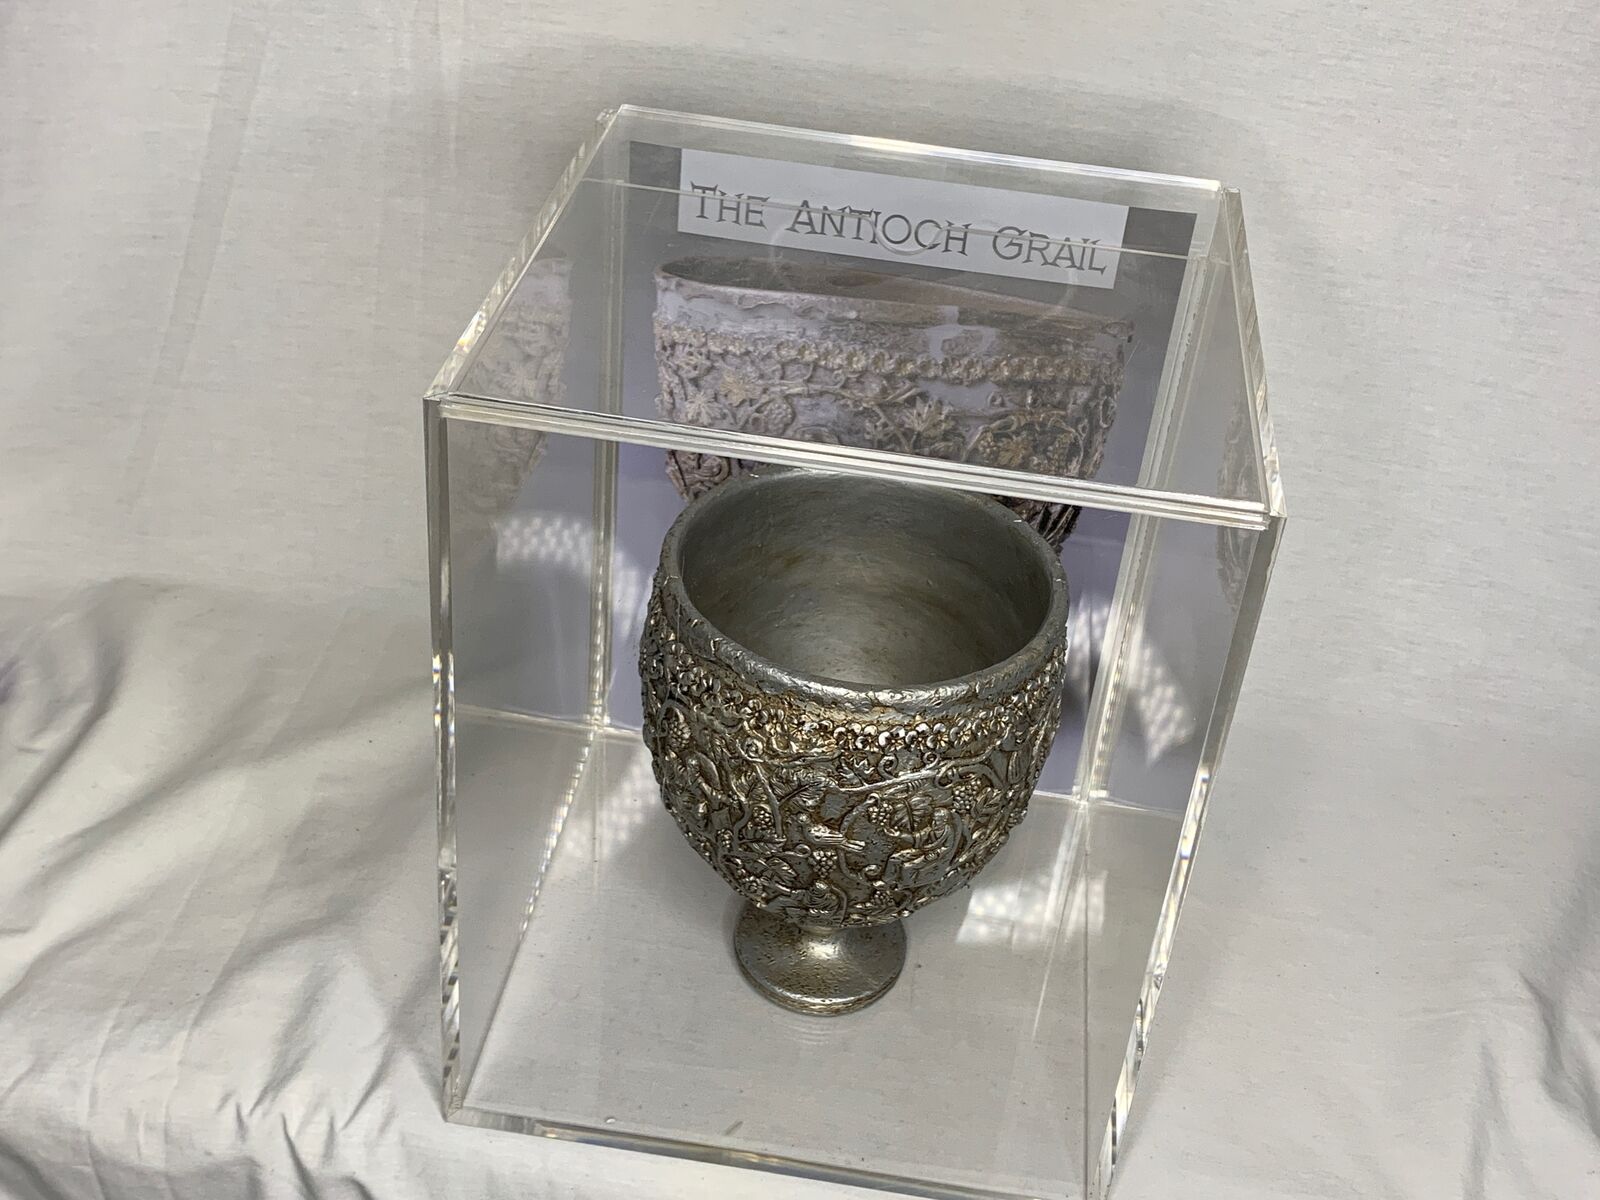 Antioch Holy Grail Chalice, Resin, Acrylic Case, Free Book, Biblical Mystery